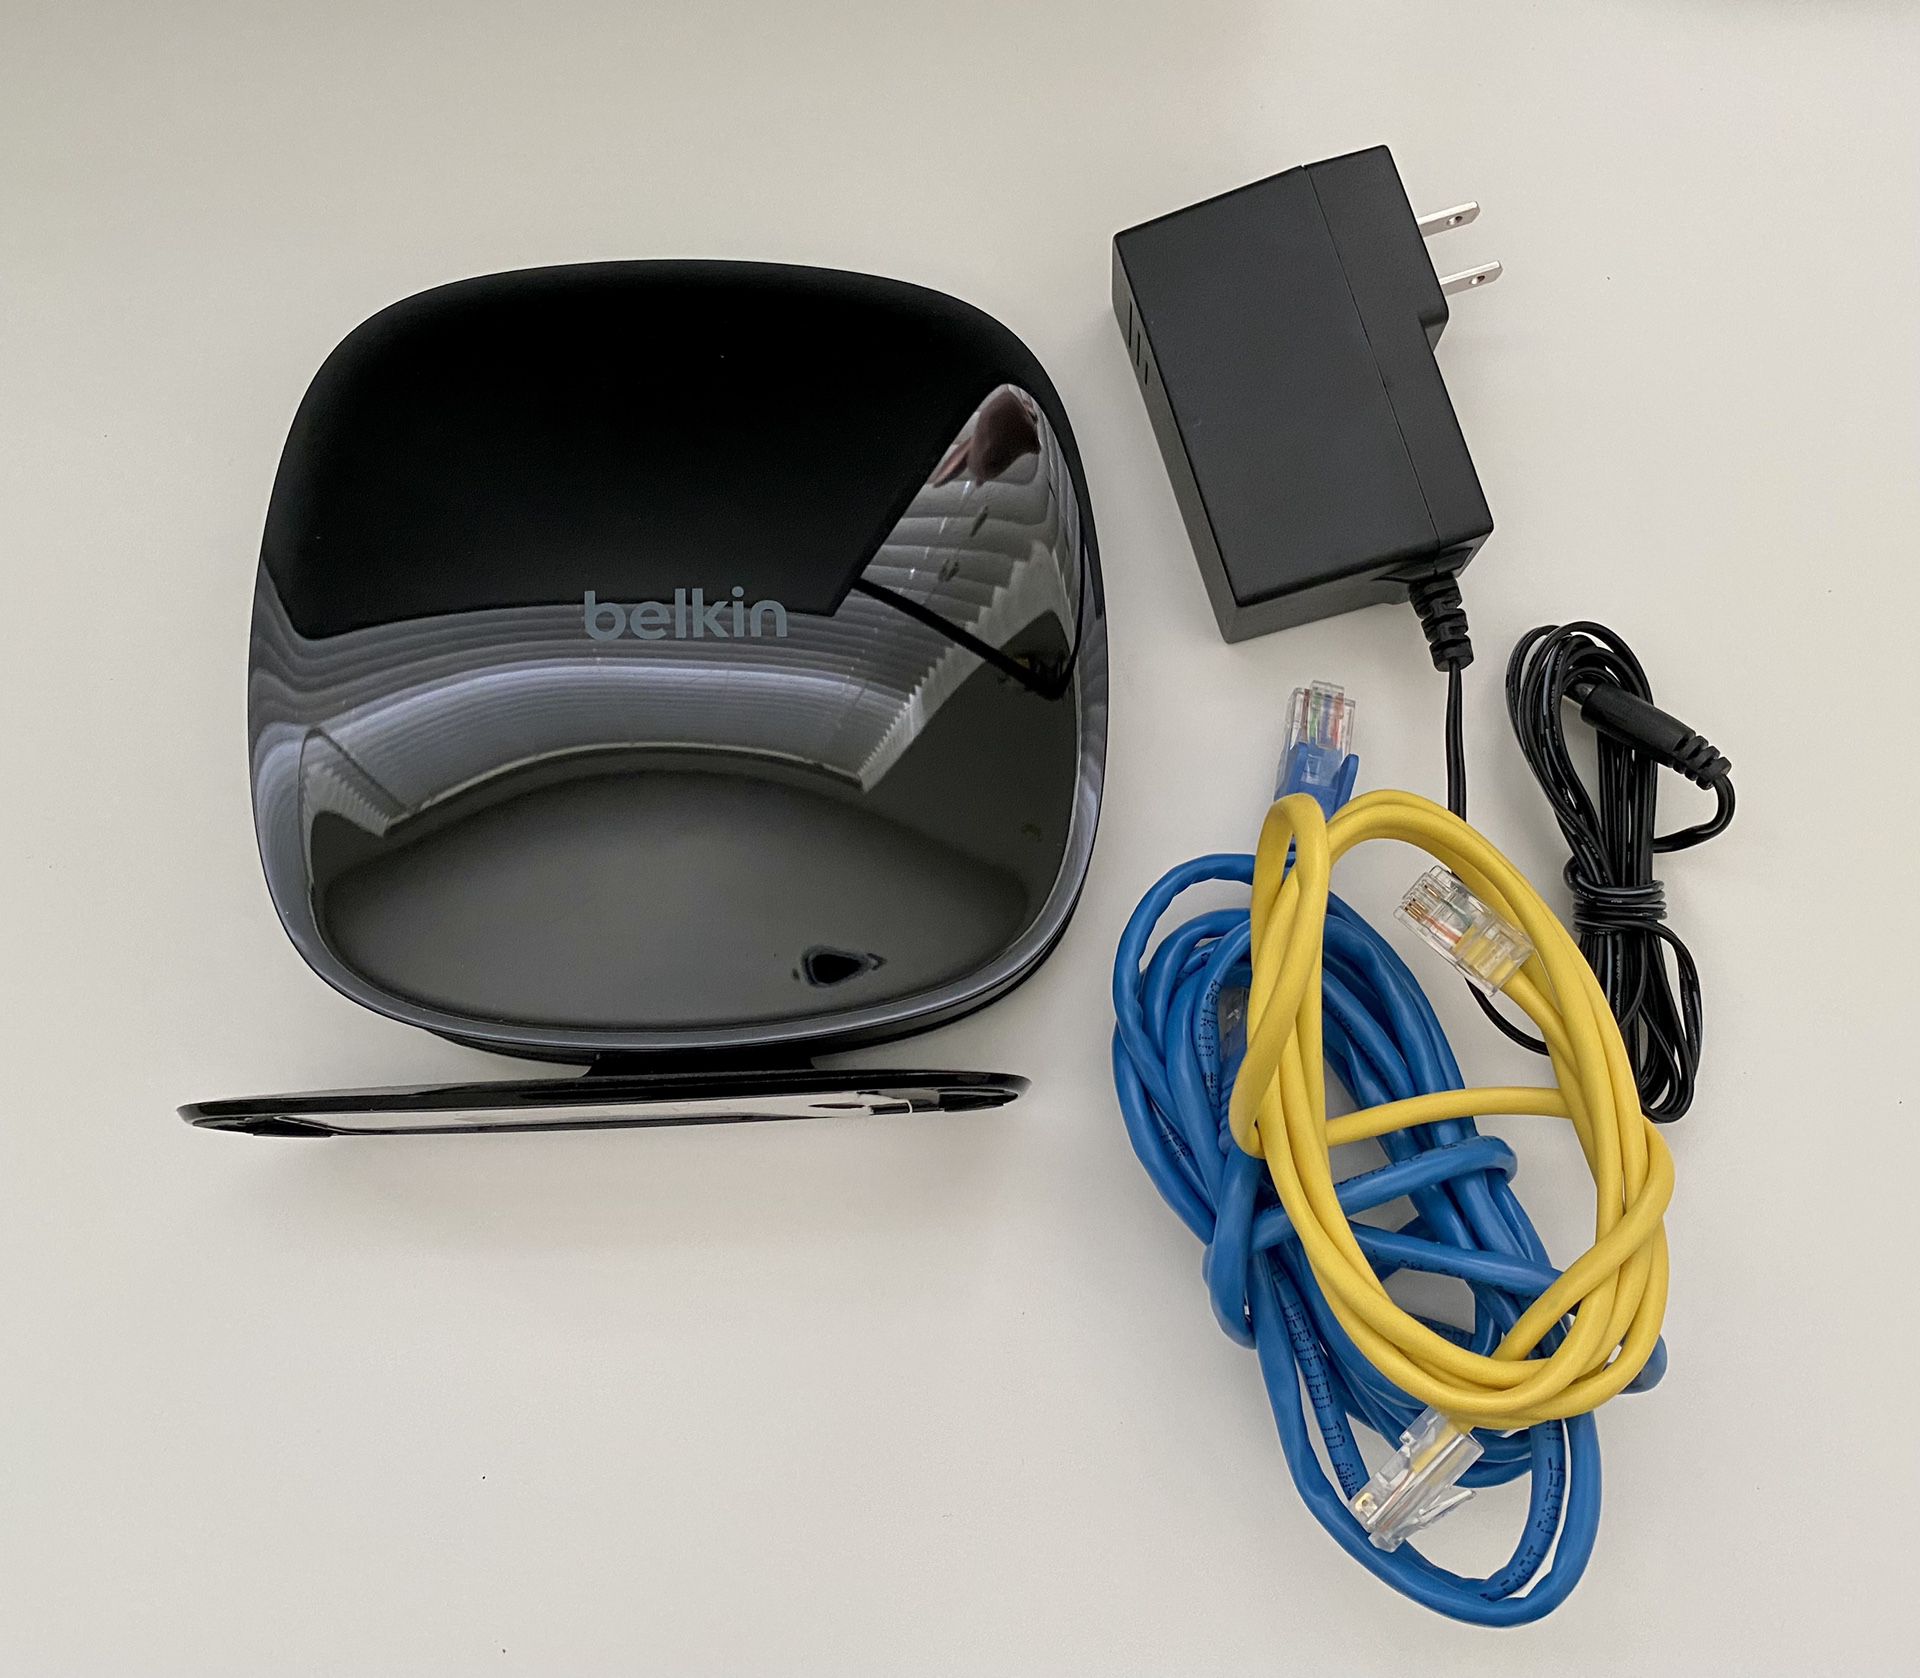 Belkin N600 DB Wireless Router With Power Adapter & Cables